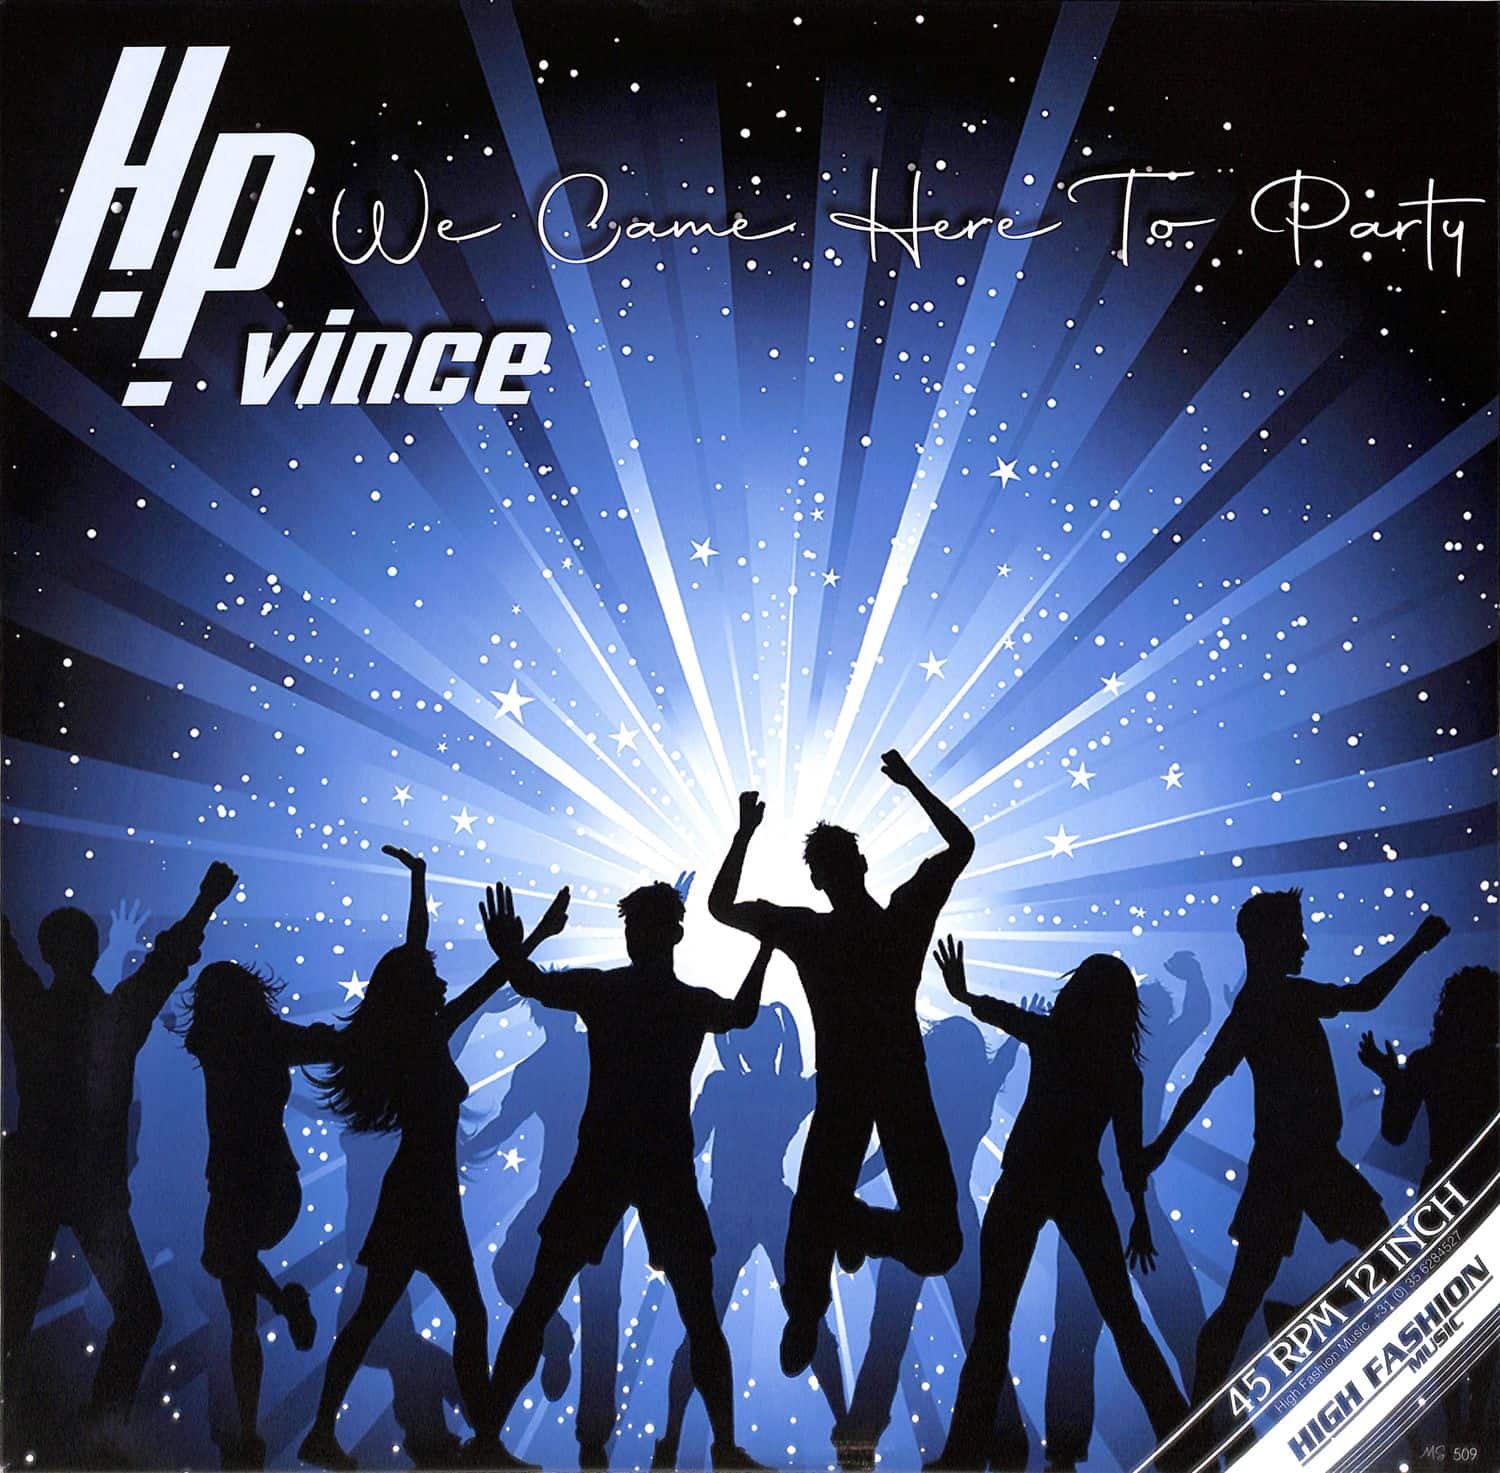 HP Vince - WE CAME HERE TO PARTY